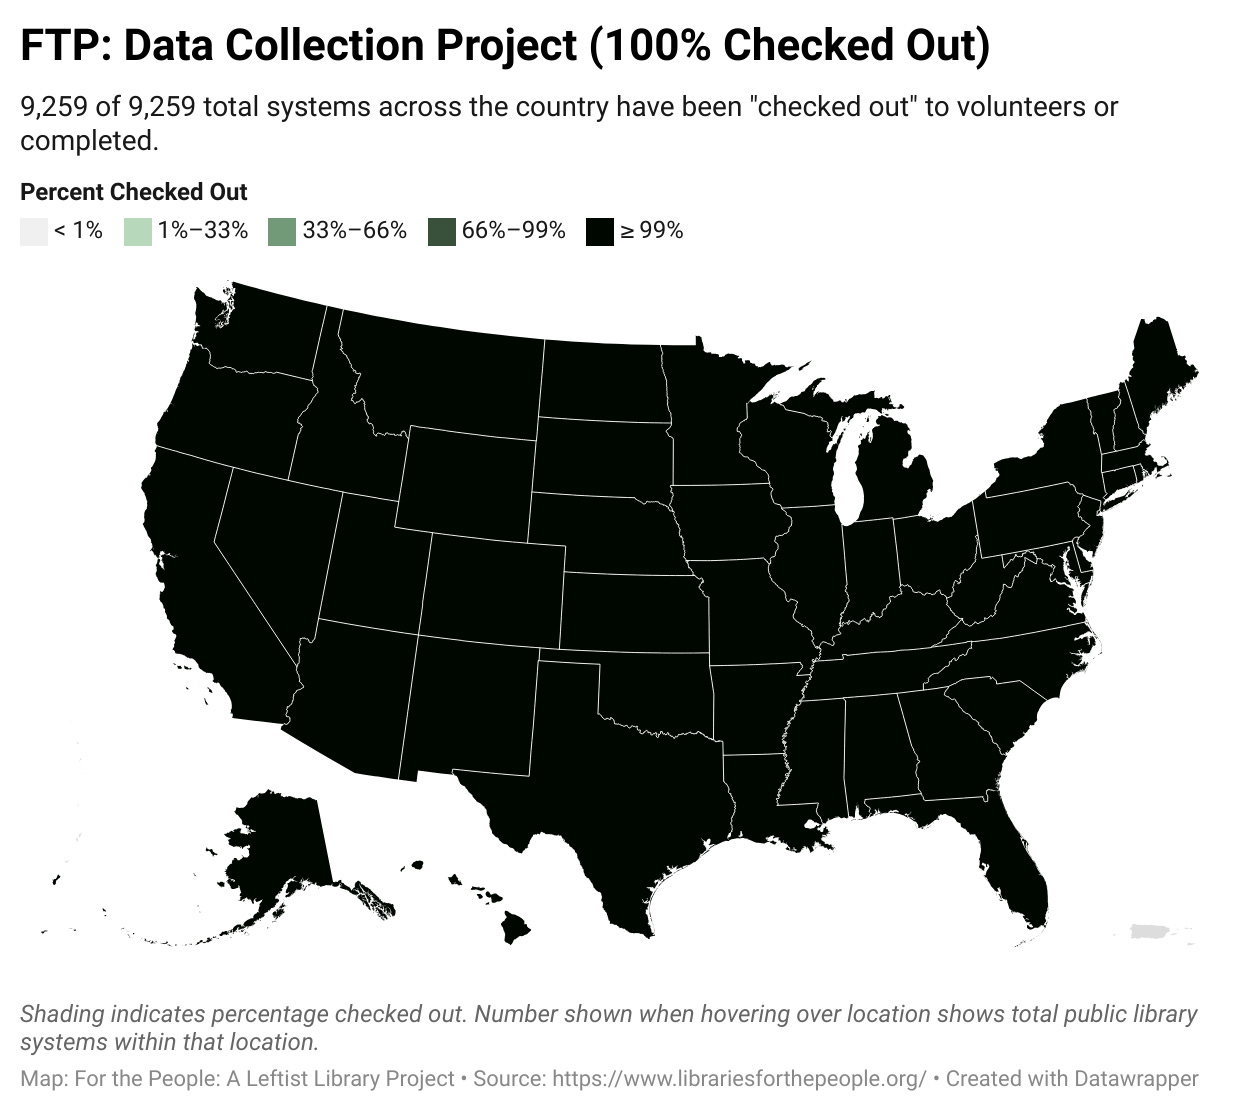 Alt text: A map of the United States with shading that indicates what percentage of each individual state has been "checked out". It's all been checked out. The data source is available in Google sheets here: https://docs.google.com/spreadsheets/d/11kwVzF4HYPS947GZfr7L7DCT73d_0sgRPe6VMdRiQug